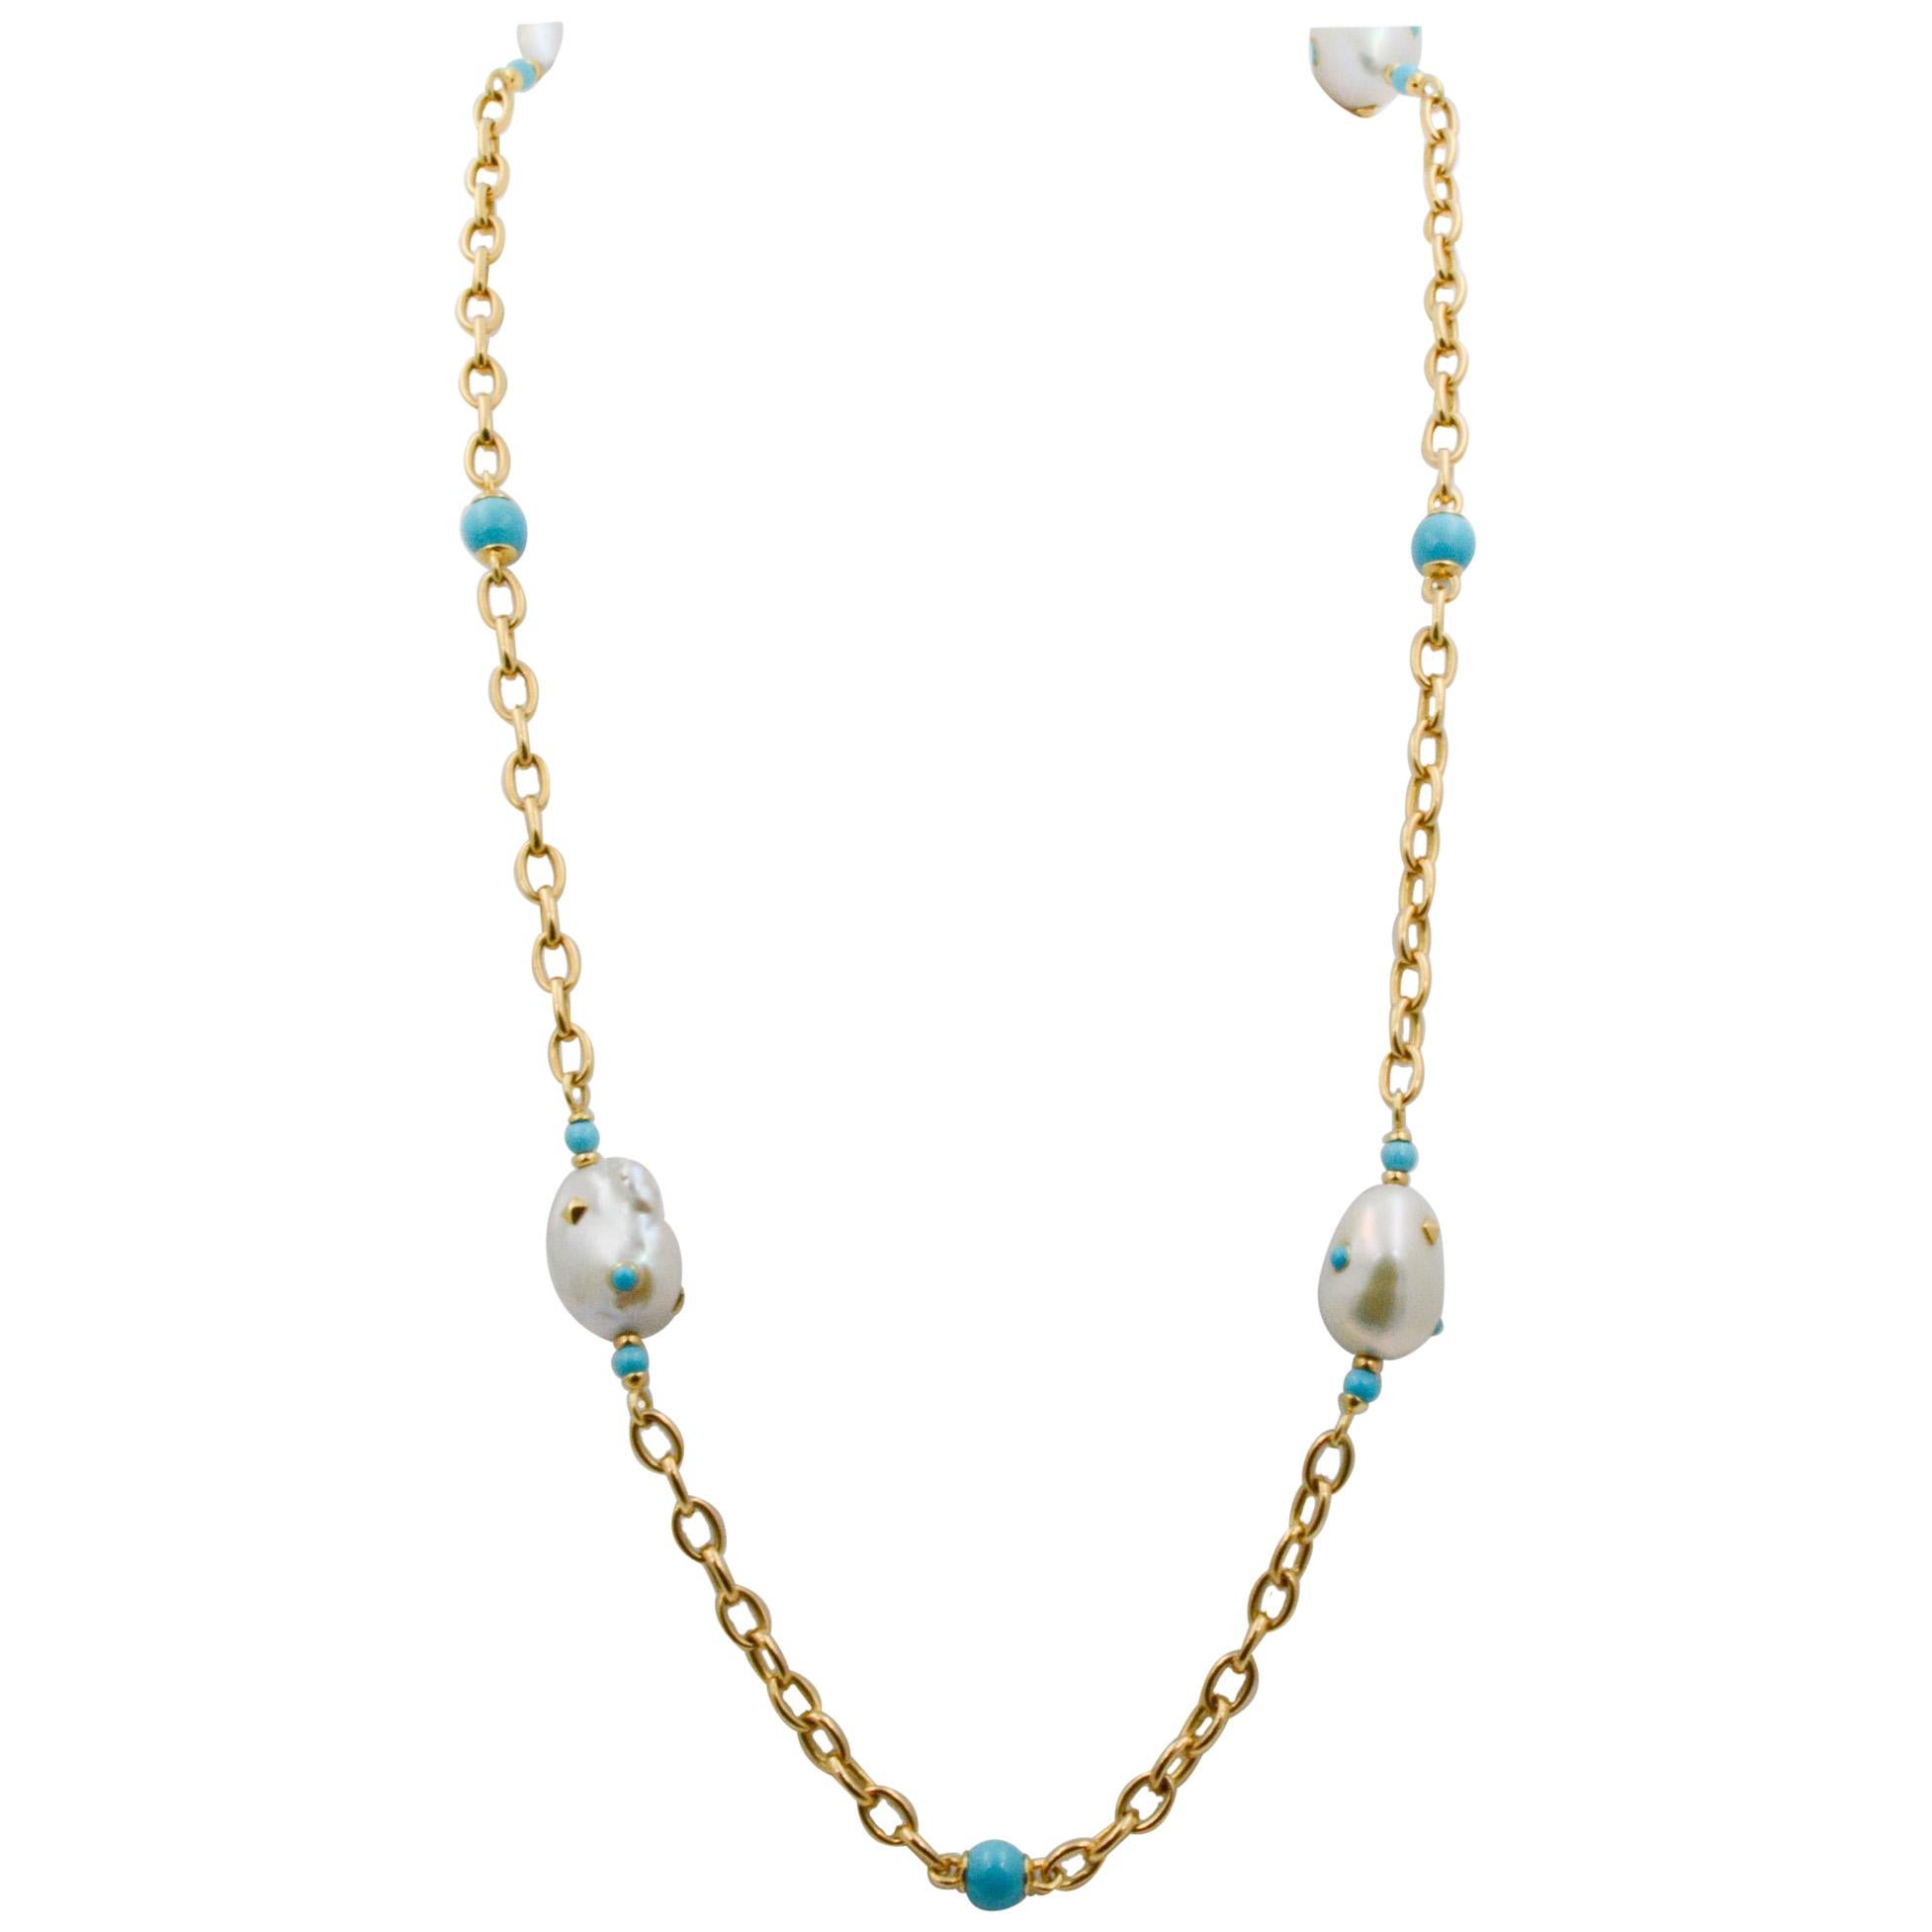 Seaman Schepps Libson 18k Gold Freshwater Pearl Turquoise Chain Necklace